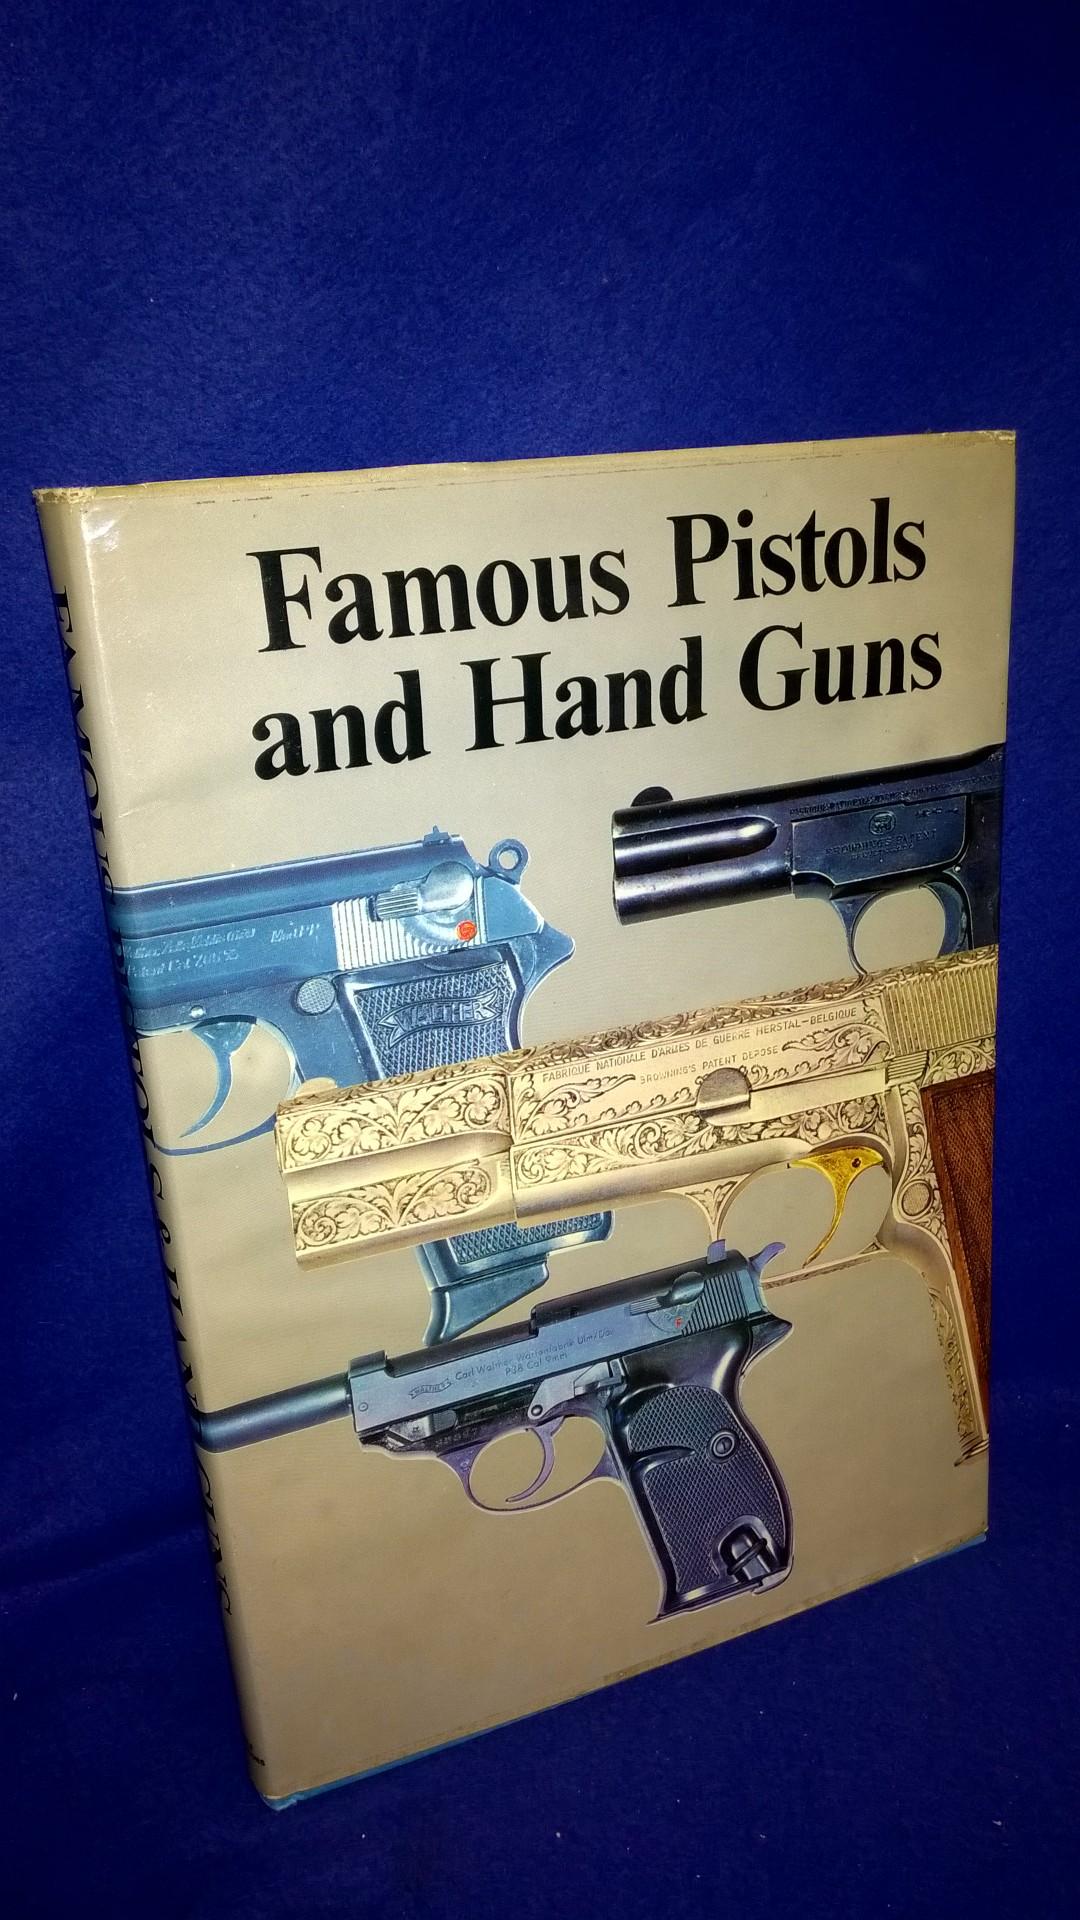 Famous Pistols and Hand Guns.